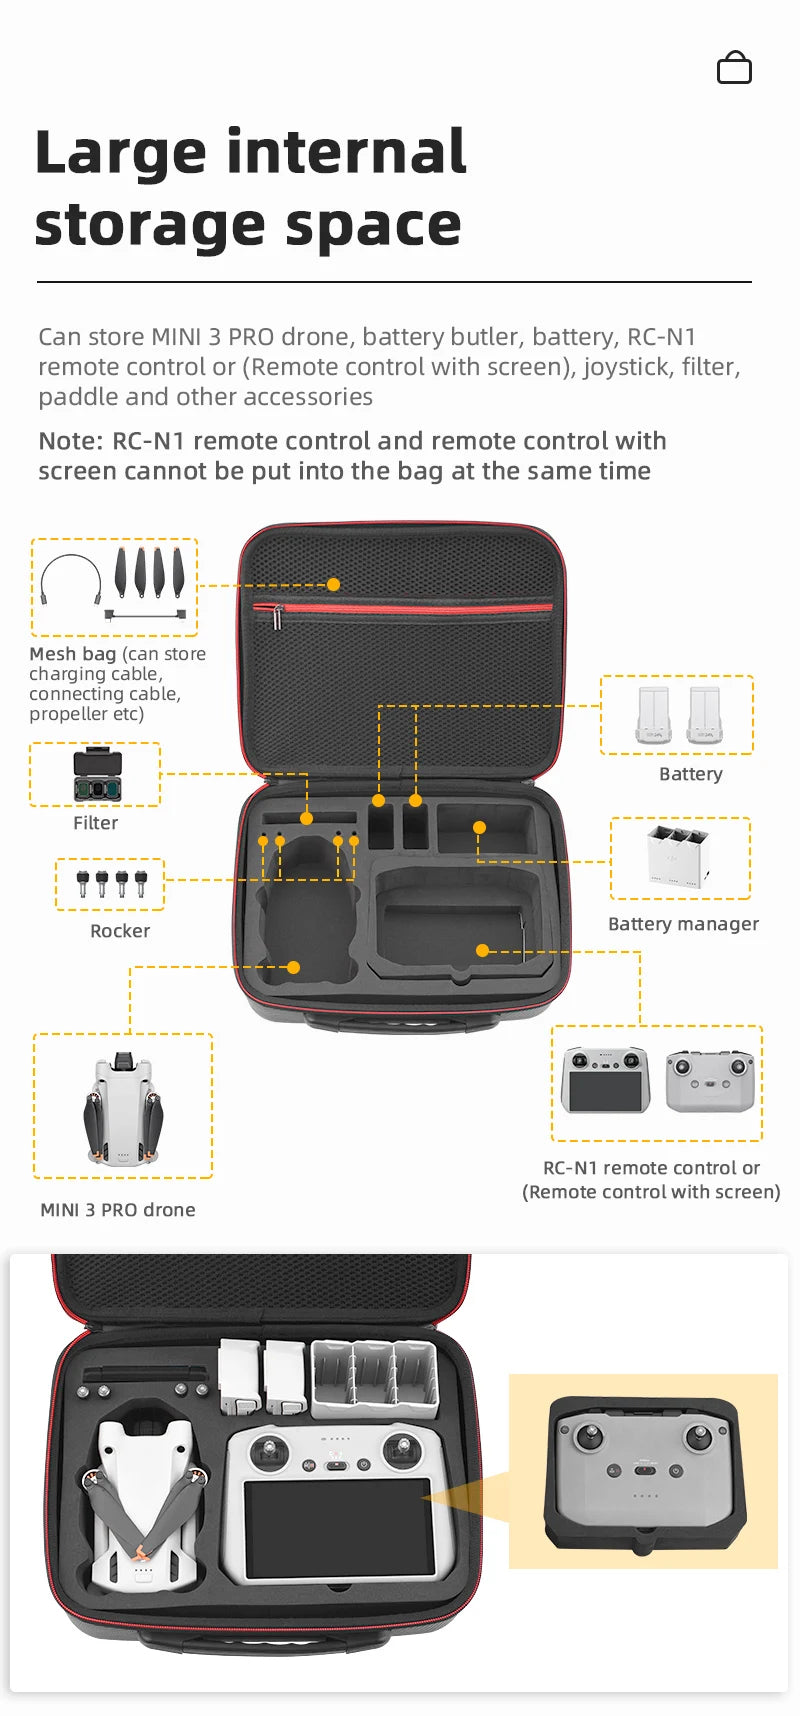 Storage Bag for DJI MINI 3 PRO, large internal storage space Can store MINI 3 PRO drone, battery butler, battery, RC